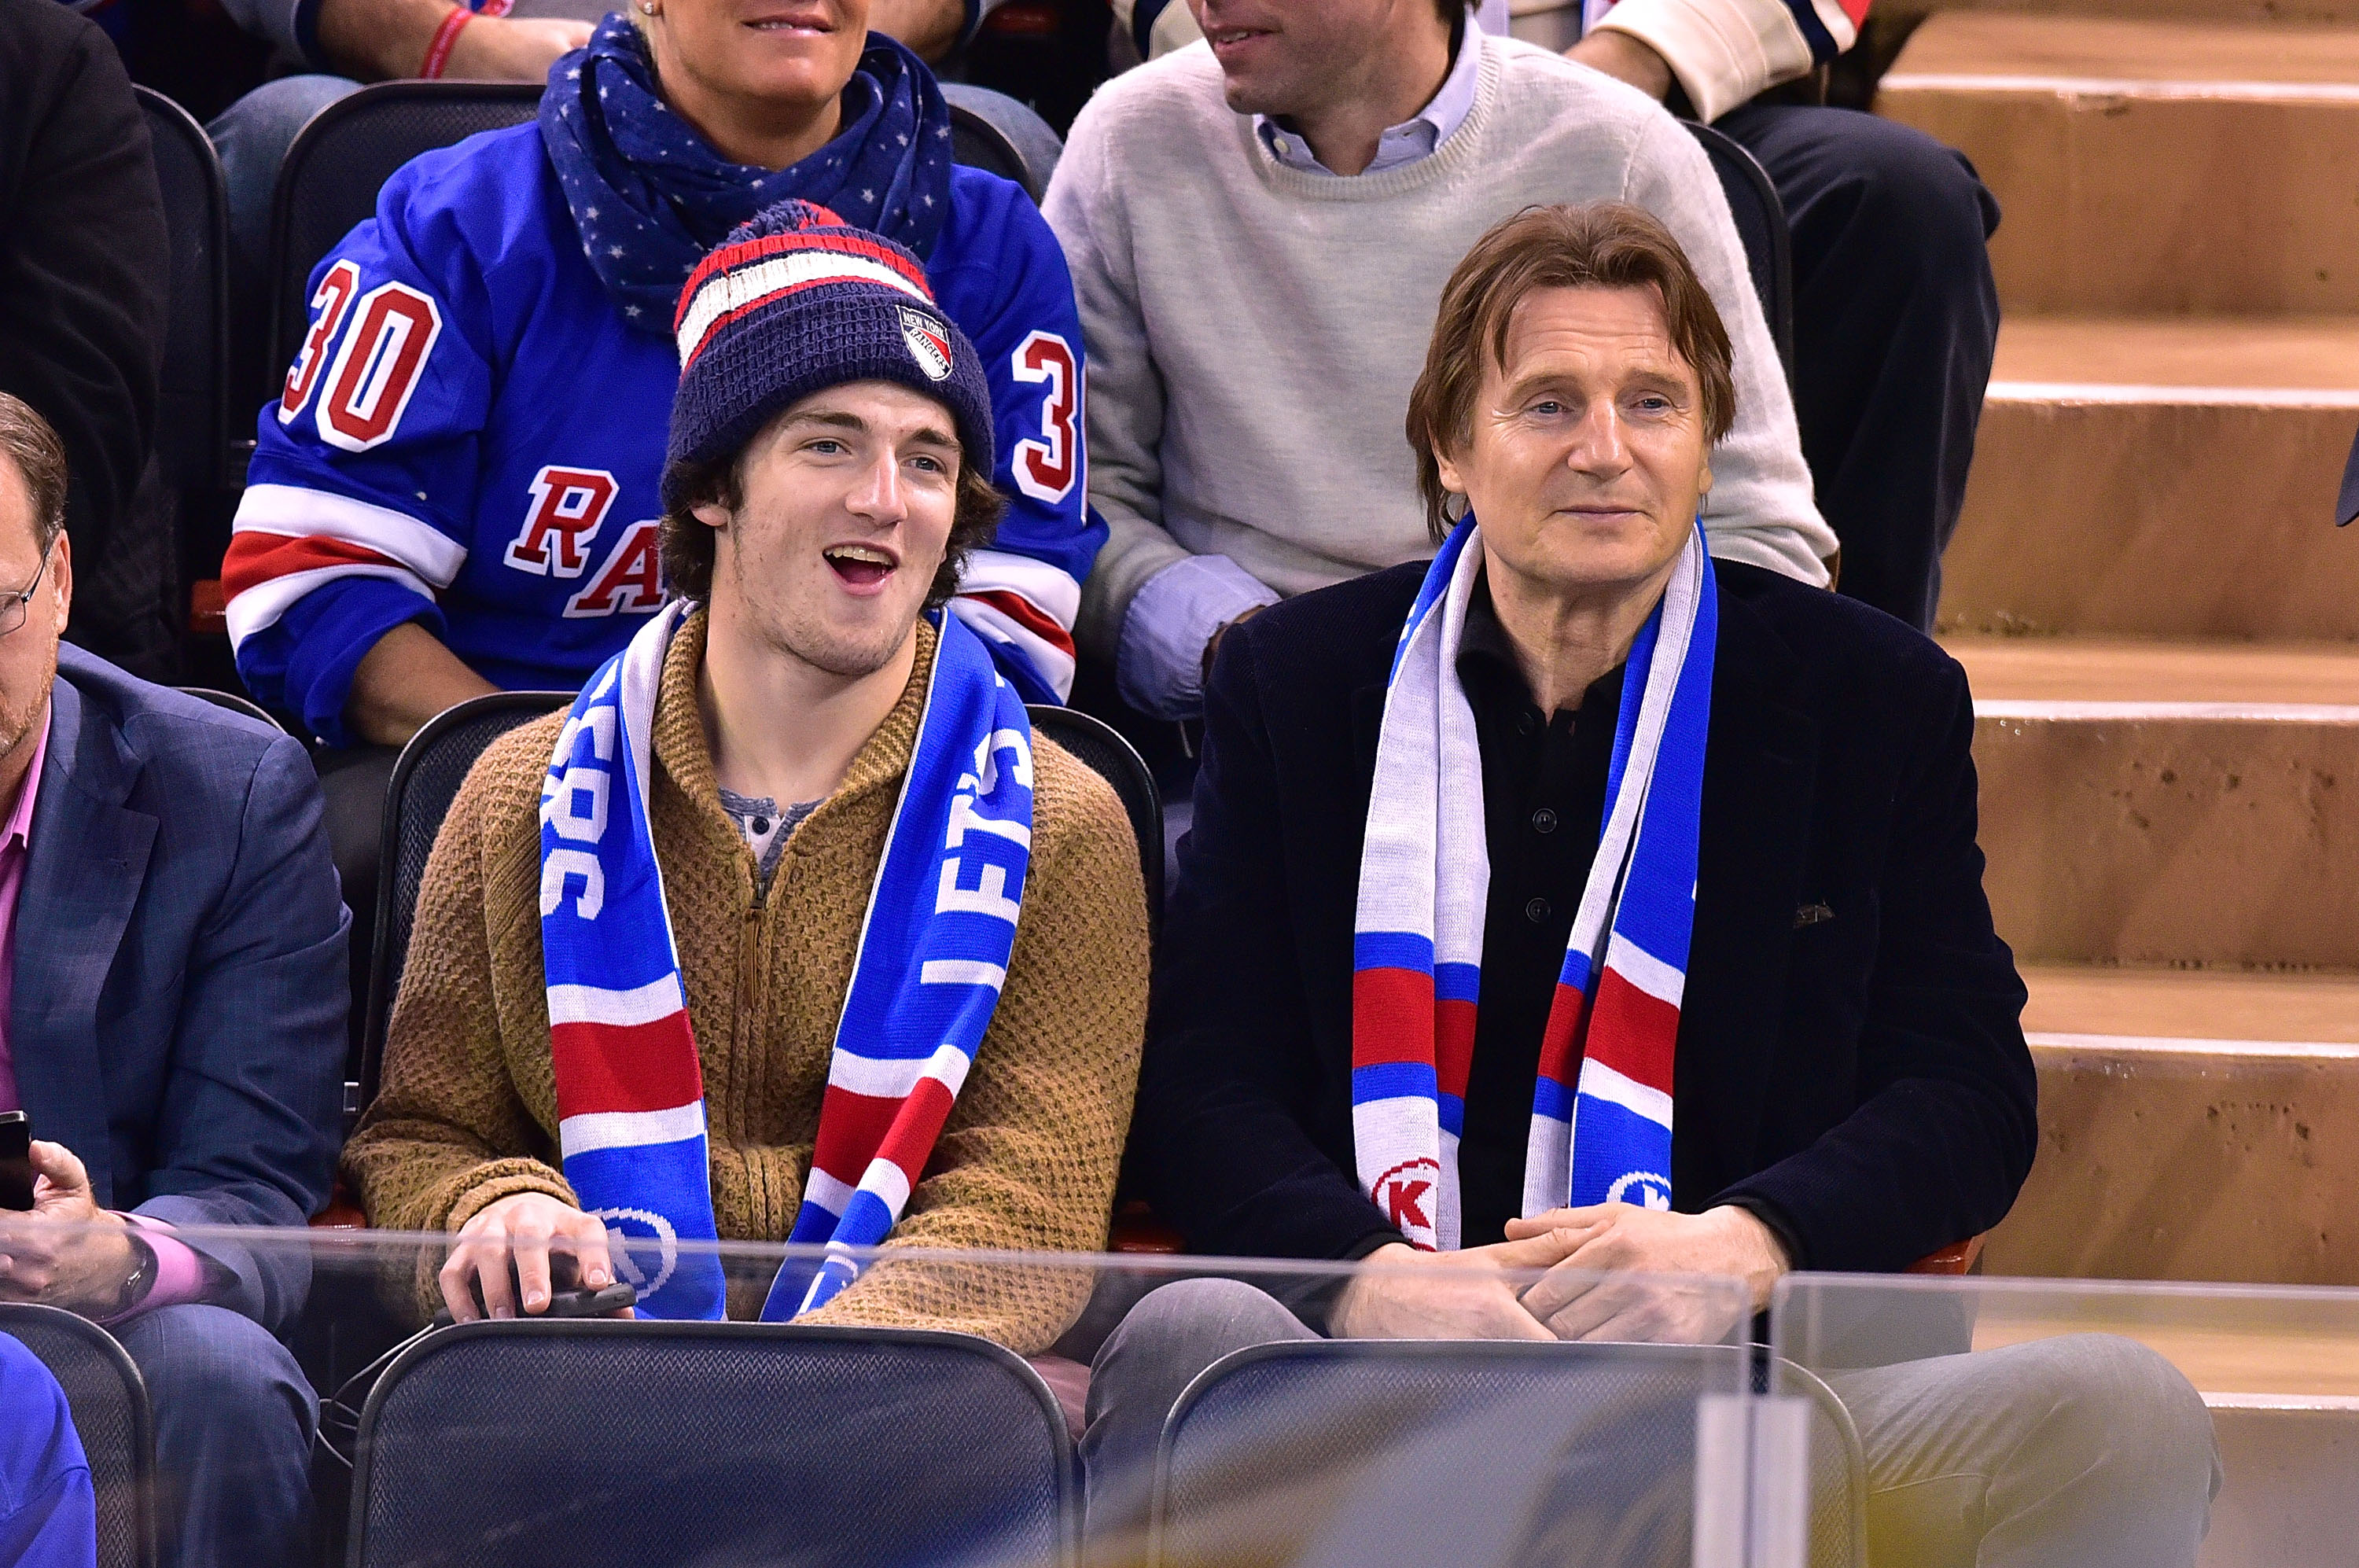 Daniel Neeson and Liam Neeson attend Ottawa Senators vs New York Rangers game at Madison Square Garden on January 20, 2015, in New York City | Source: Getty Images